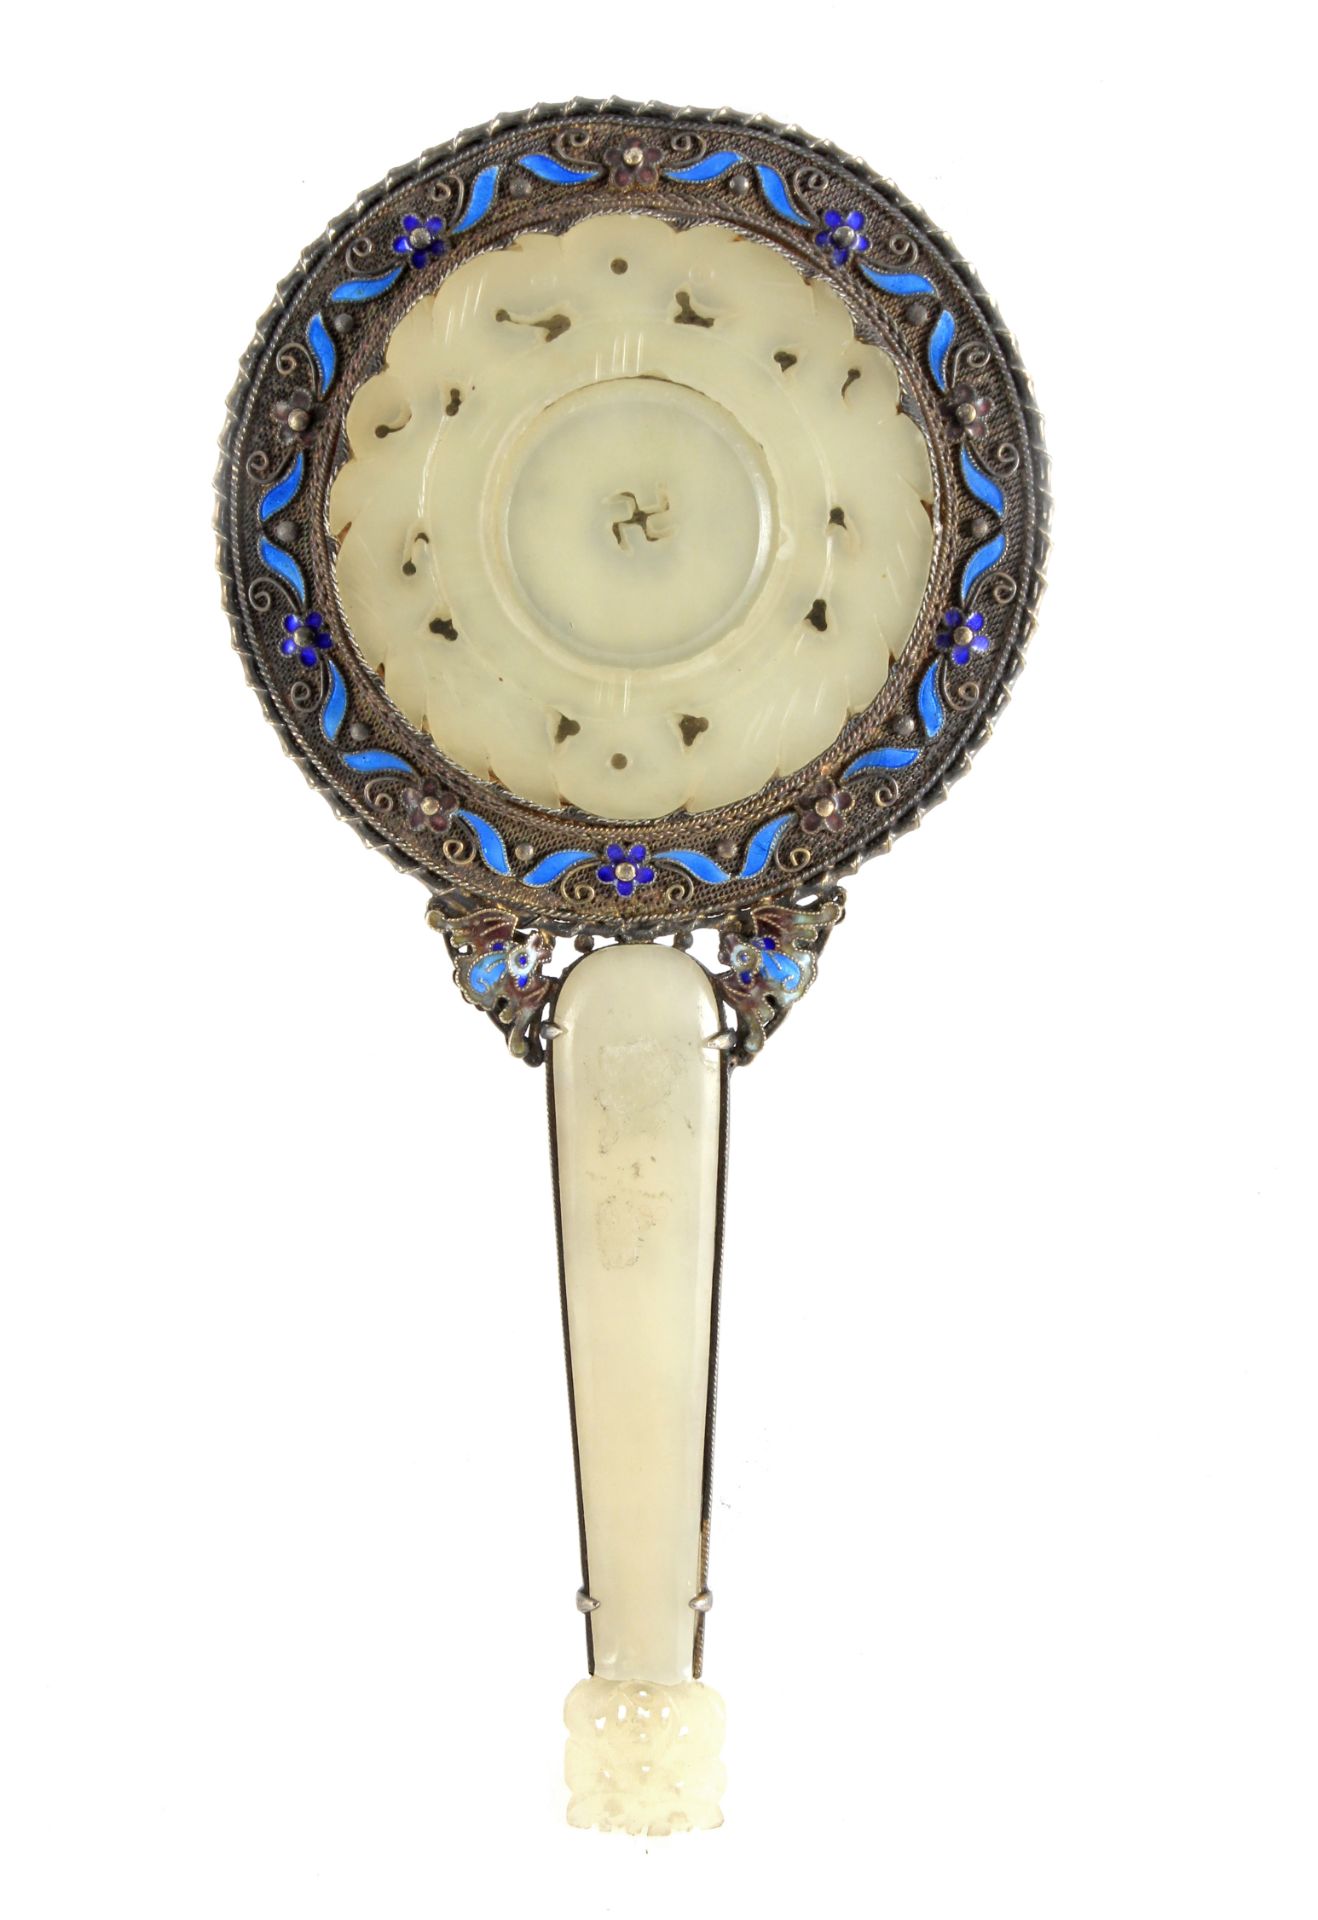 A Chinese silver filigree mirror circa 1950 with embossed jade medallions and enamels - Image 2 of 2